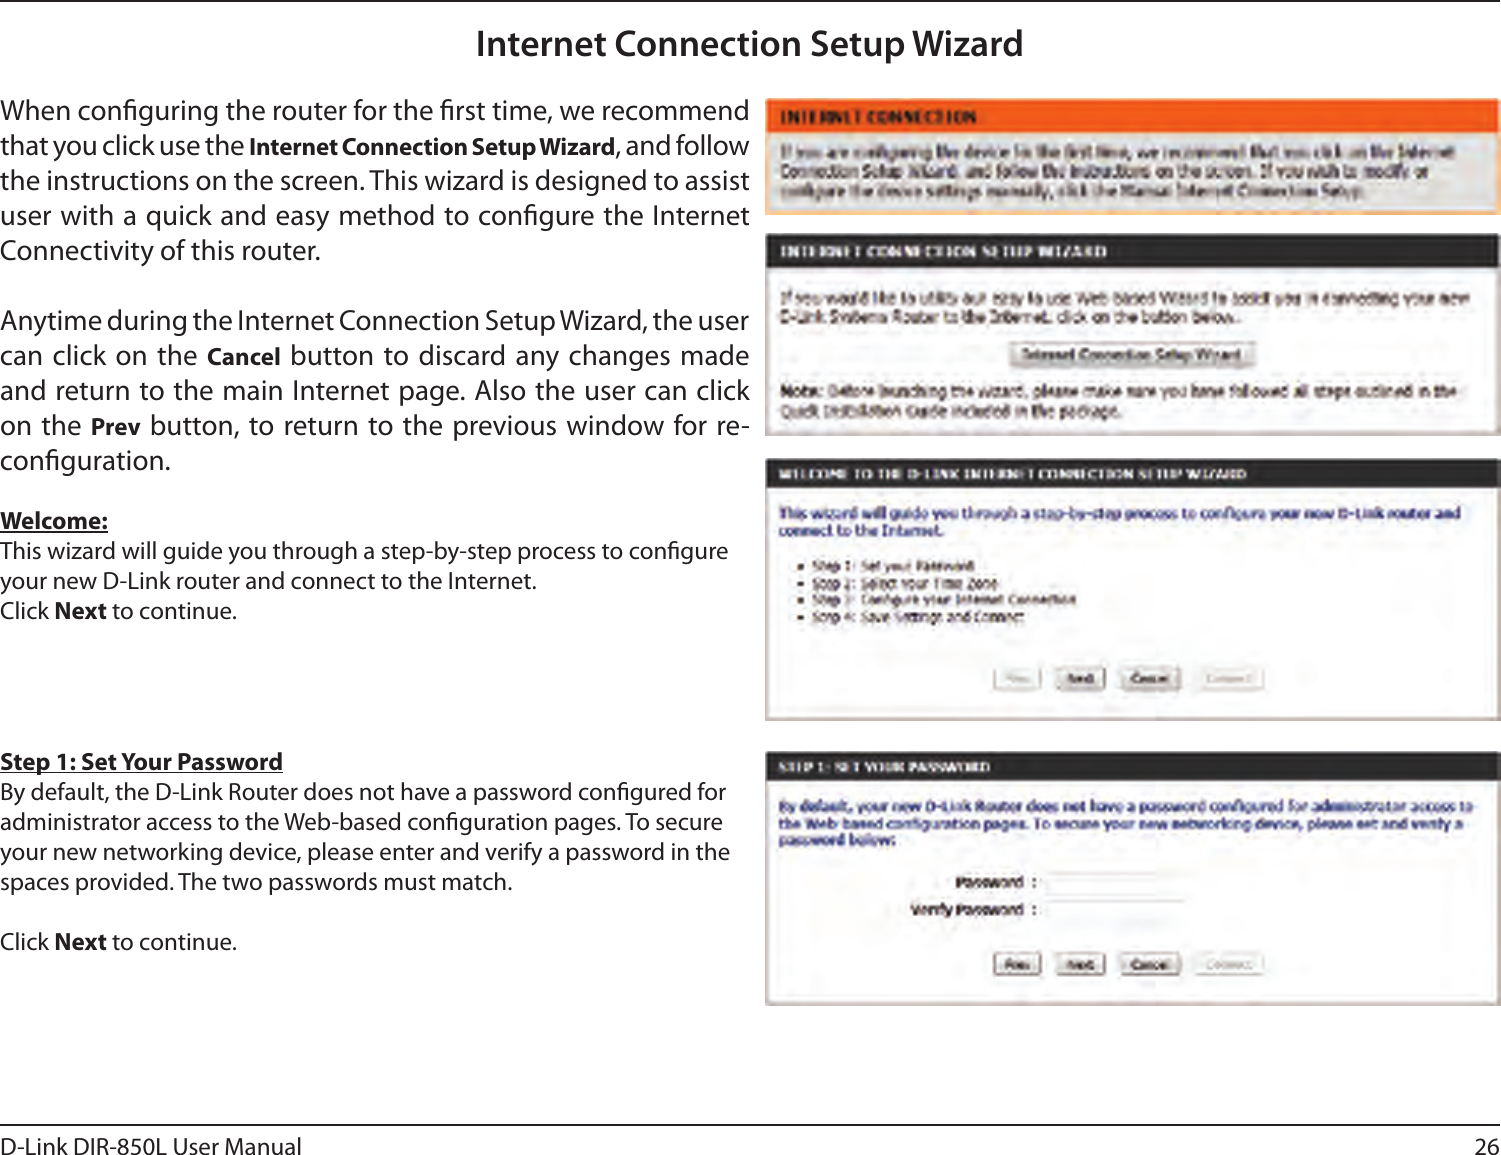 26D-Link DIR-850L User ManualInternet Connection Setup WizardWhen conguring the router for the rst time, we recommend that you click use the Internet Connection Setup Wizard, and follow the instructions on the screen. This wizard is designed to assist user with a quick and easy method to congure the Internet Connectivity of this router.Anytime during the Internet Connection Setup Wizard, the user can click on  the Cancel button to discard any changes  made and return to the main Internet page. Also the user can click on the Prev button, to return to the previous window for re-conguration.Welcome:This wizard will guide you through a step-by-step process to congure your new D-Link router and connect to the Internet. Click Next to continue.Step 1: Set Your PasswordBy default, the D-Link Router does not have a password congured for administrator access to the Web-based conguration pages. To secure your new networking device, please enter and verify a password in the spaces provided. The two passwords must match.Click Next to continue.